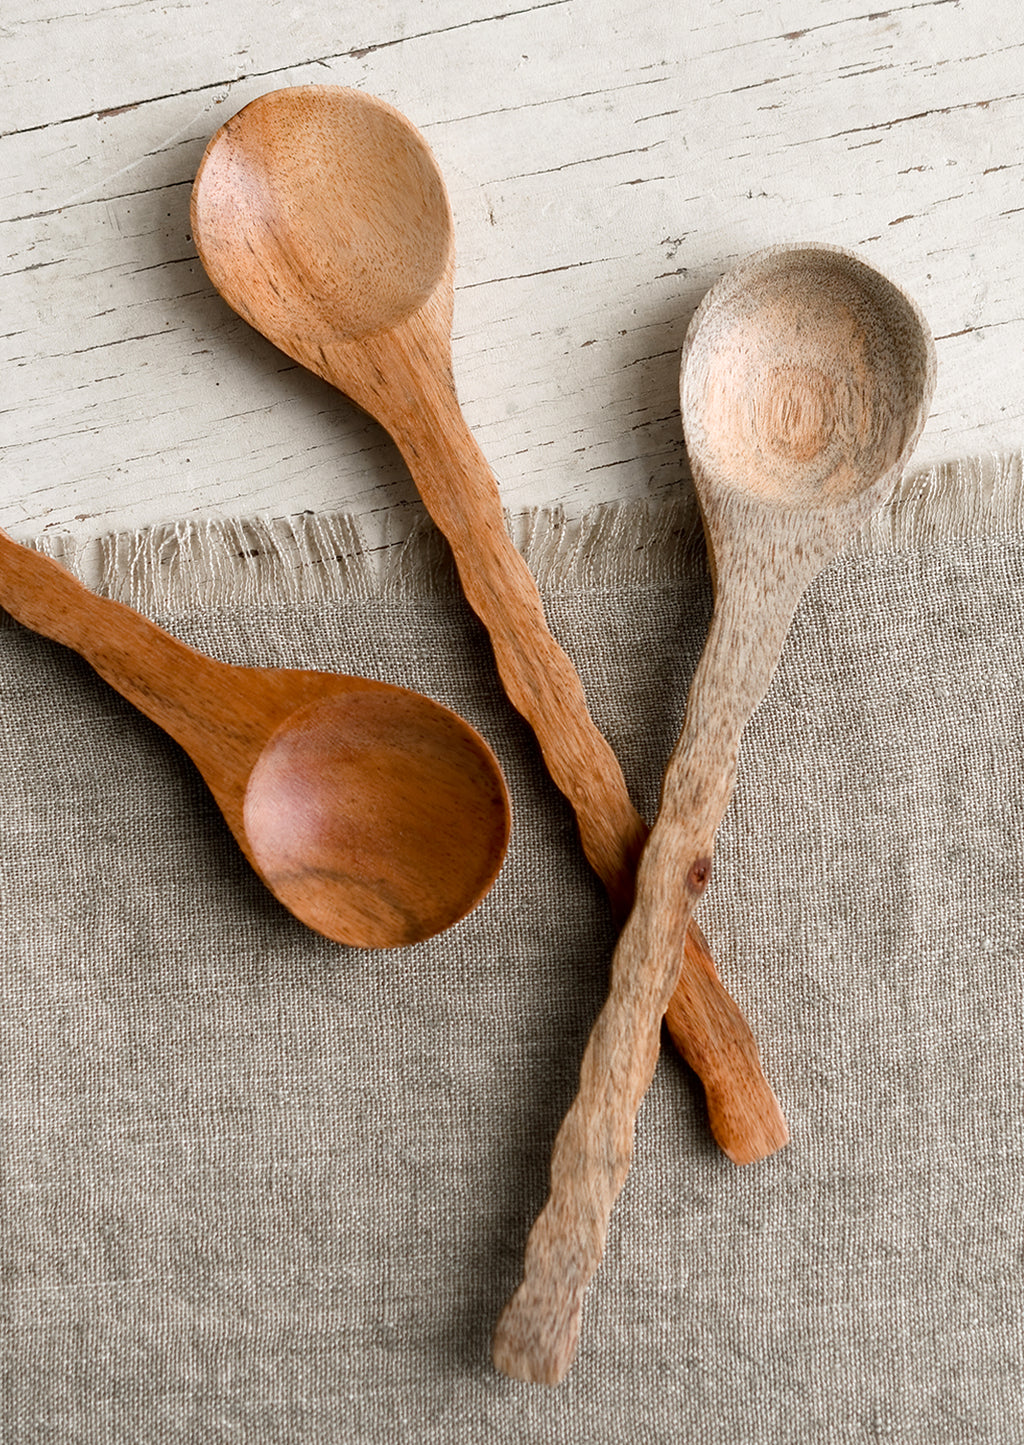 1: Three wooden spoons with wavy handles in various wood tones.